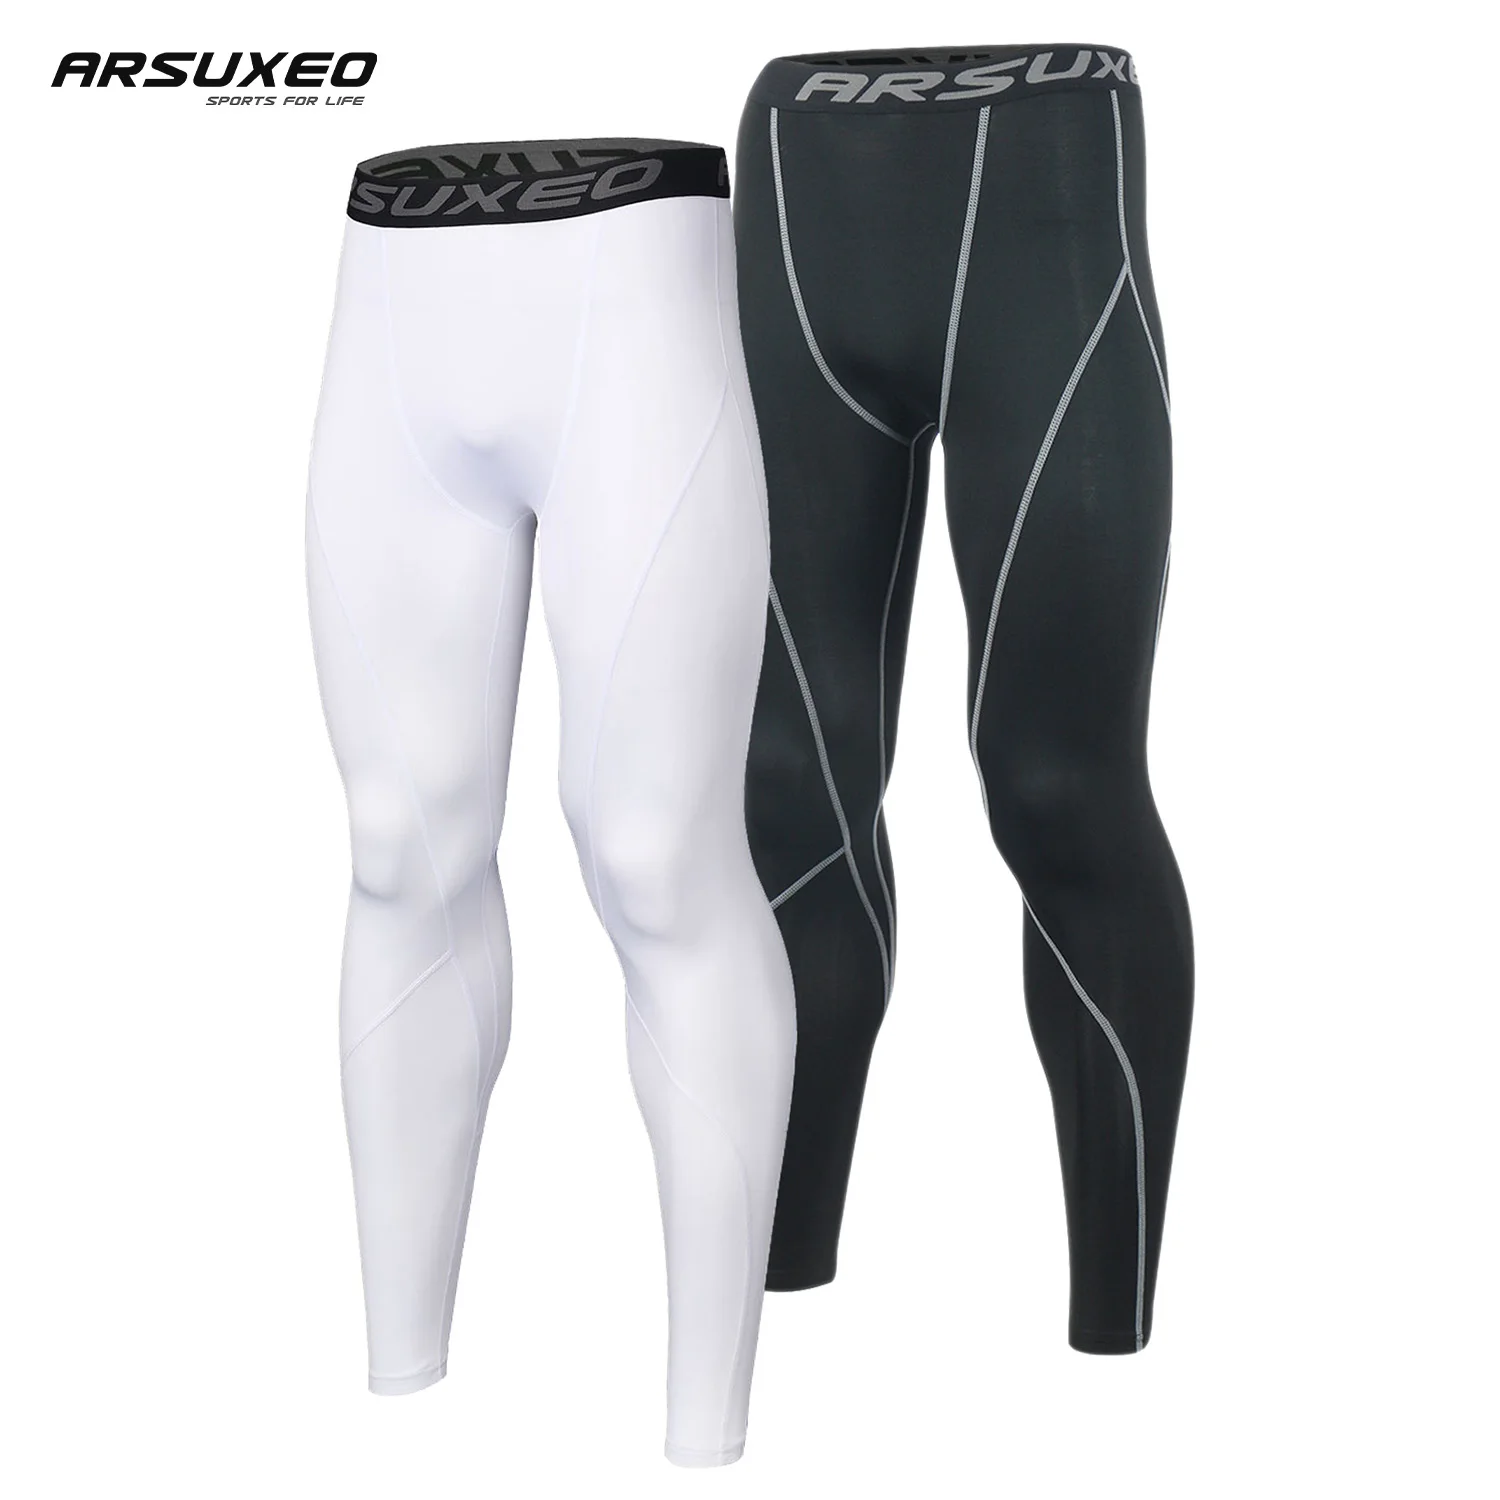 

ARSUXEO Men's Compression Tight Leggings Running Sport Pants Gym Training Joggings Tights Sports Pants Quick Dry Fitness Trouser